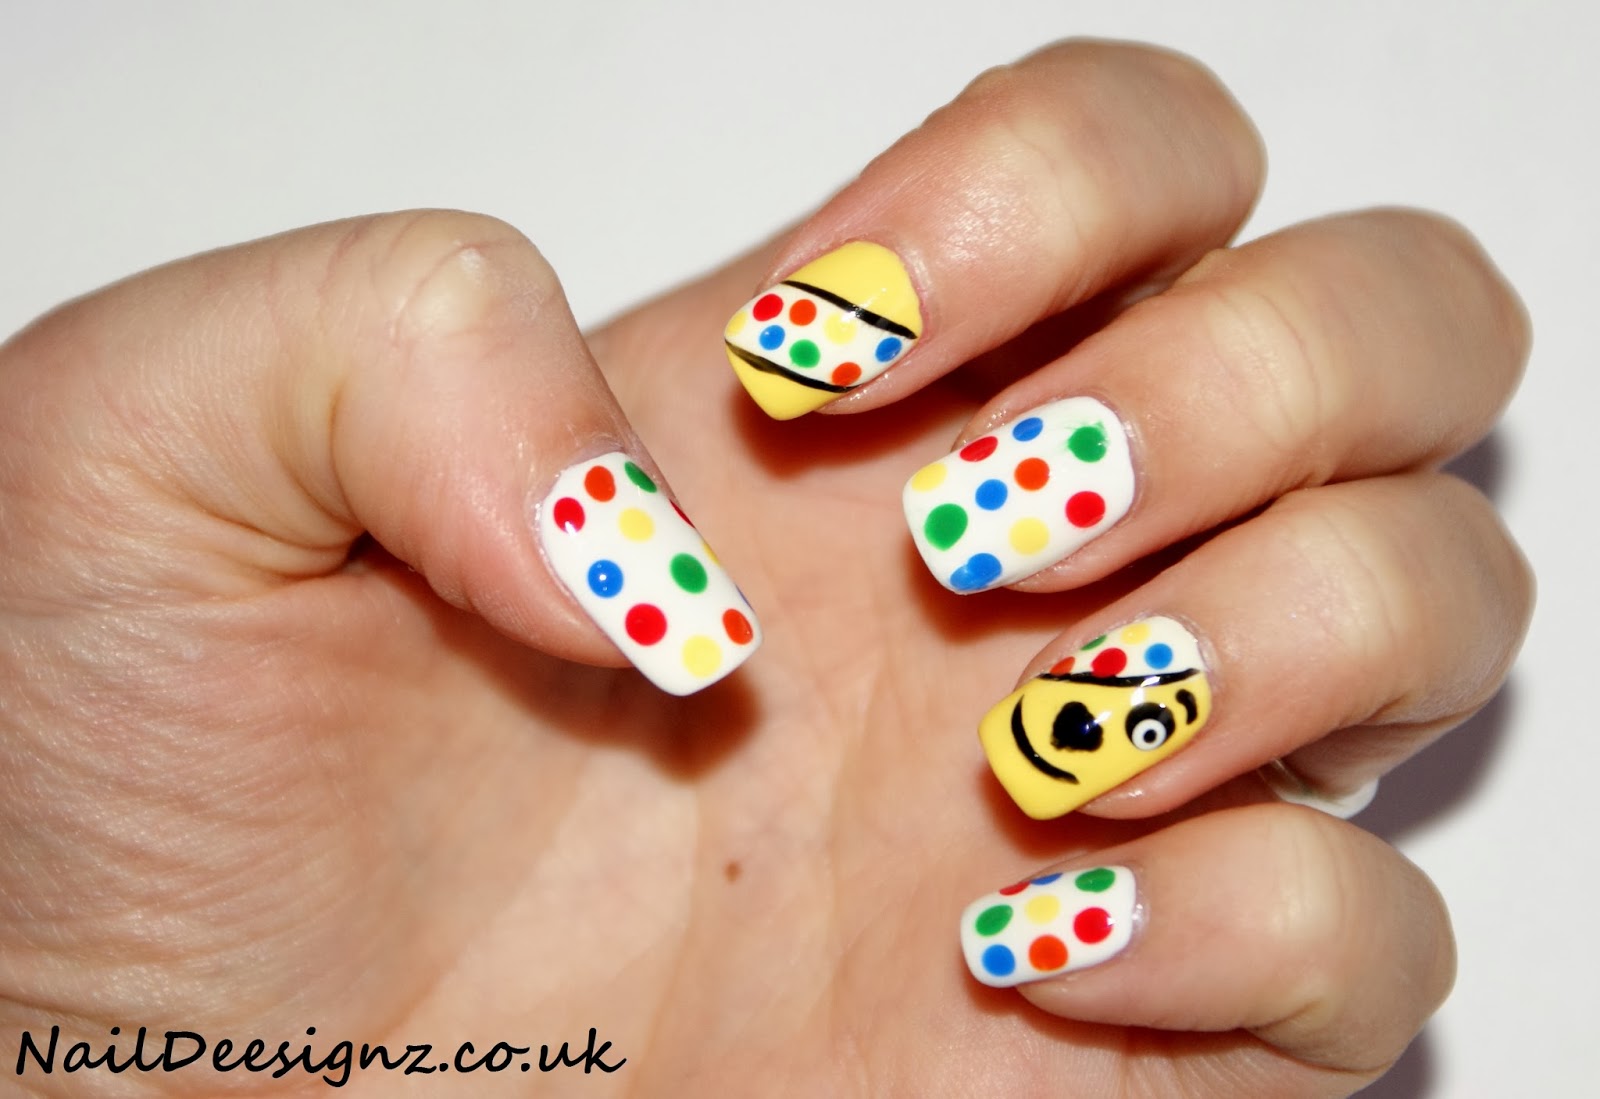 2. Adorable Nail Designs for Little Girls - wide 2